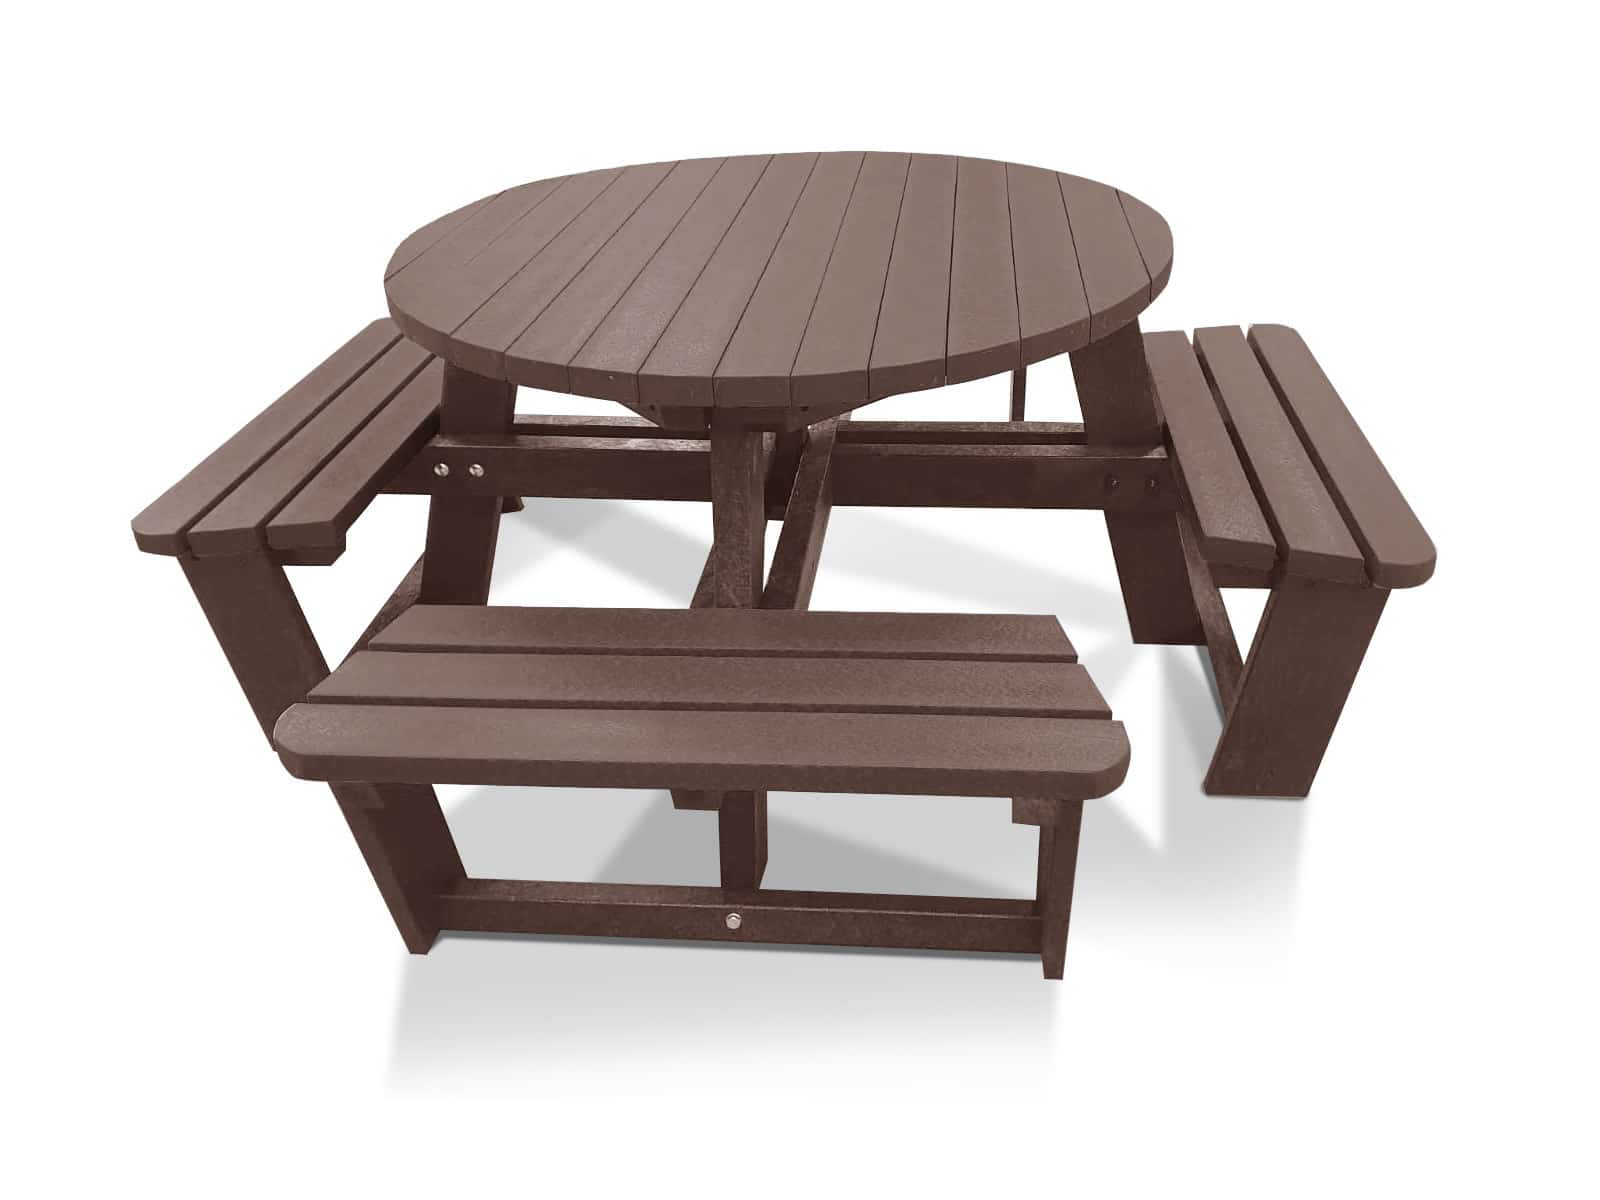 The Calder 8 seater recycled plastic round table in brown